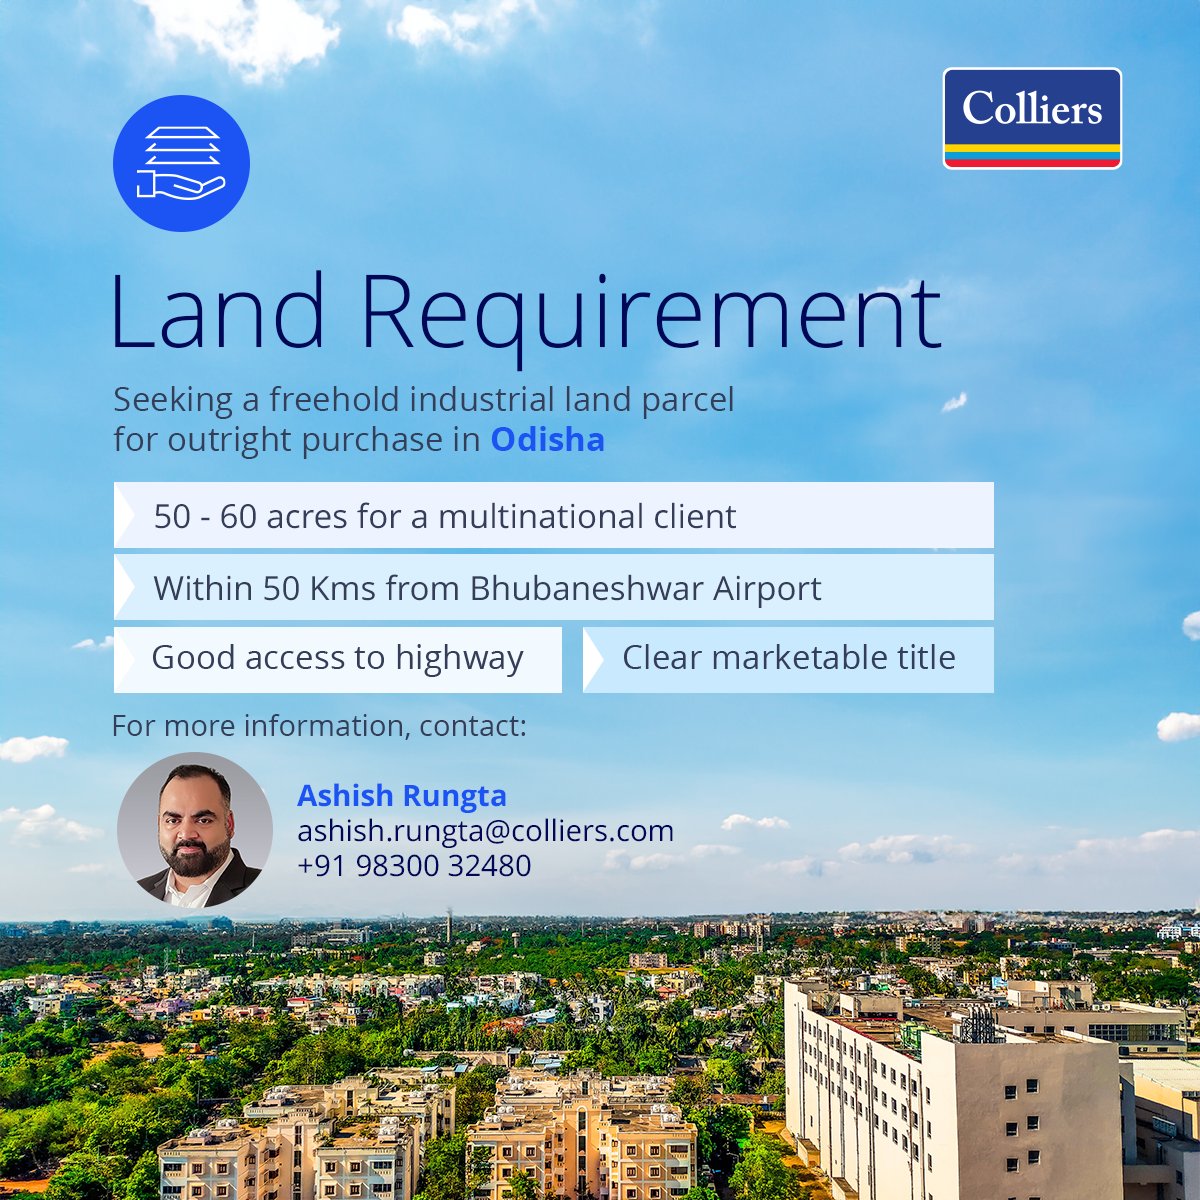 A multinational company is looking to acquire a land parcel in Bhubaneshwar to set up an industrial unit.

Contact Ashish Rungta at Ashish.Rungta@colliers.com for further details.

Learn more: ow.ly/1tO150RZO1t

#ColliersIndia #industrialland #industrial #propertymarketing